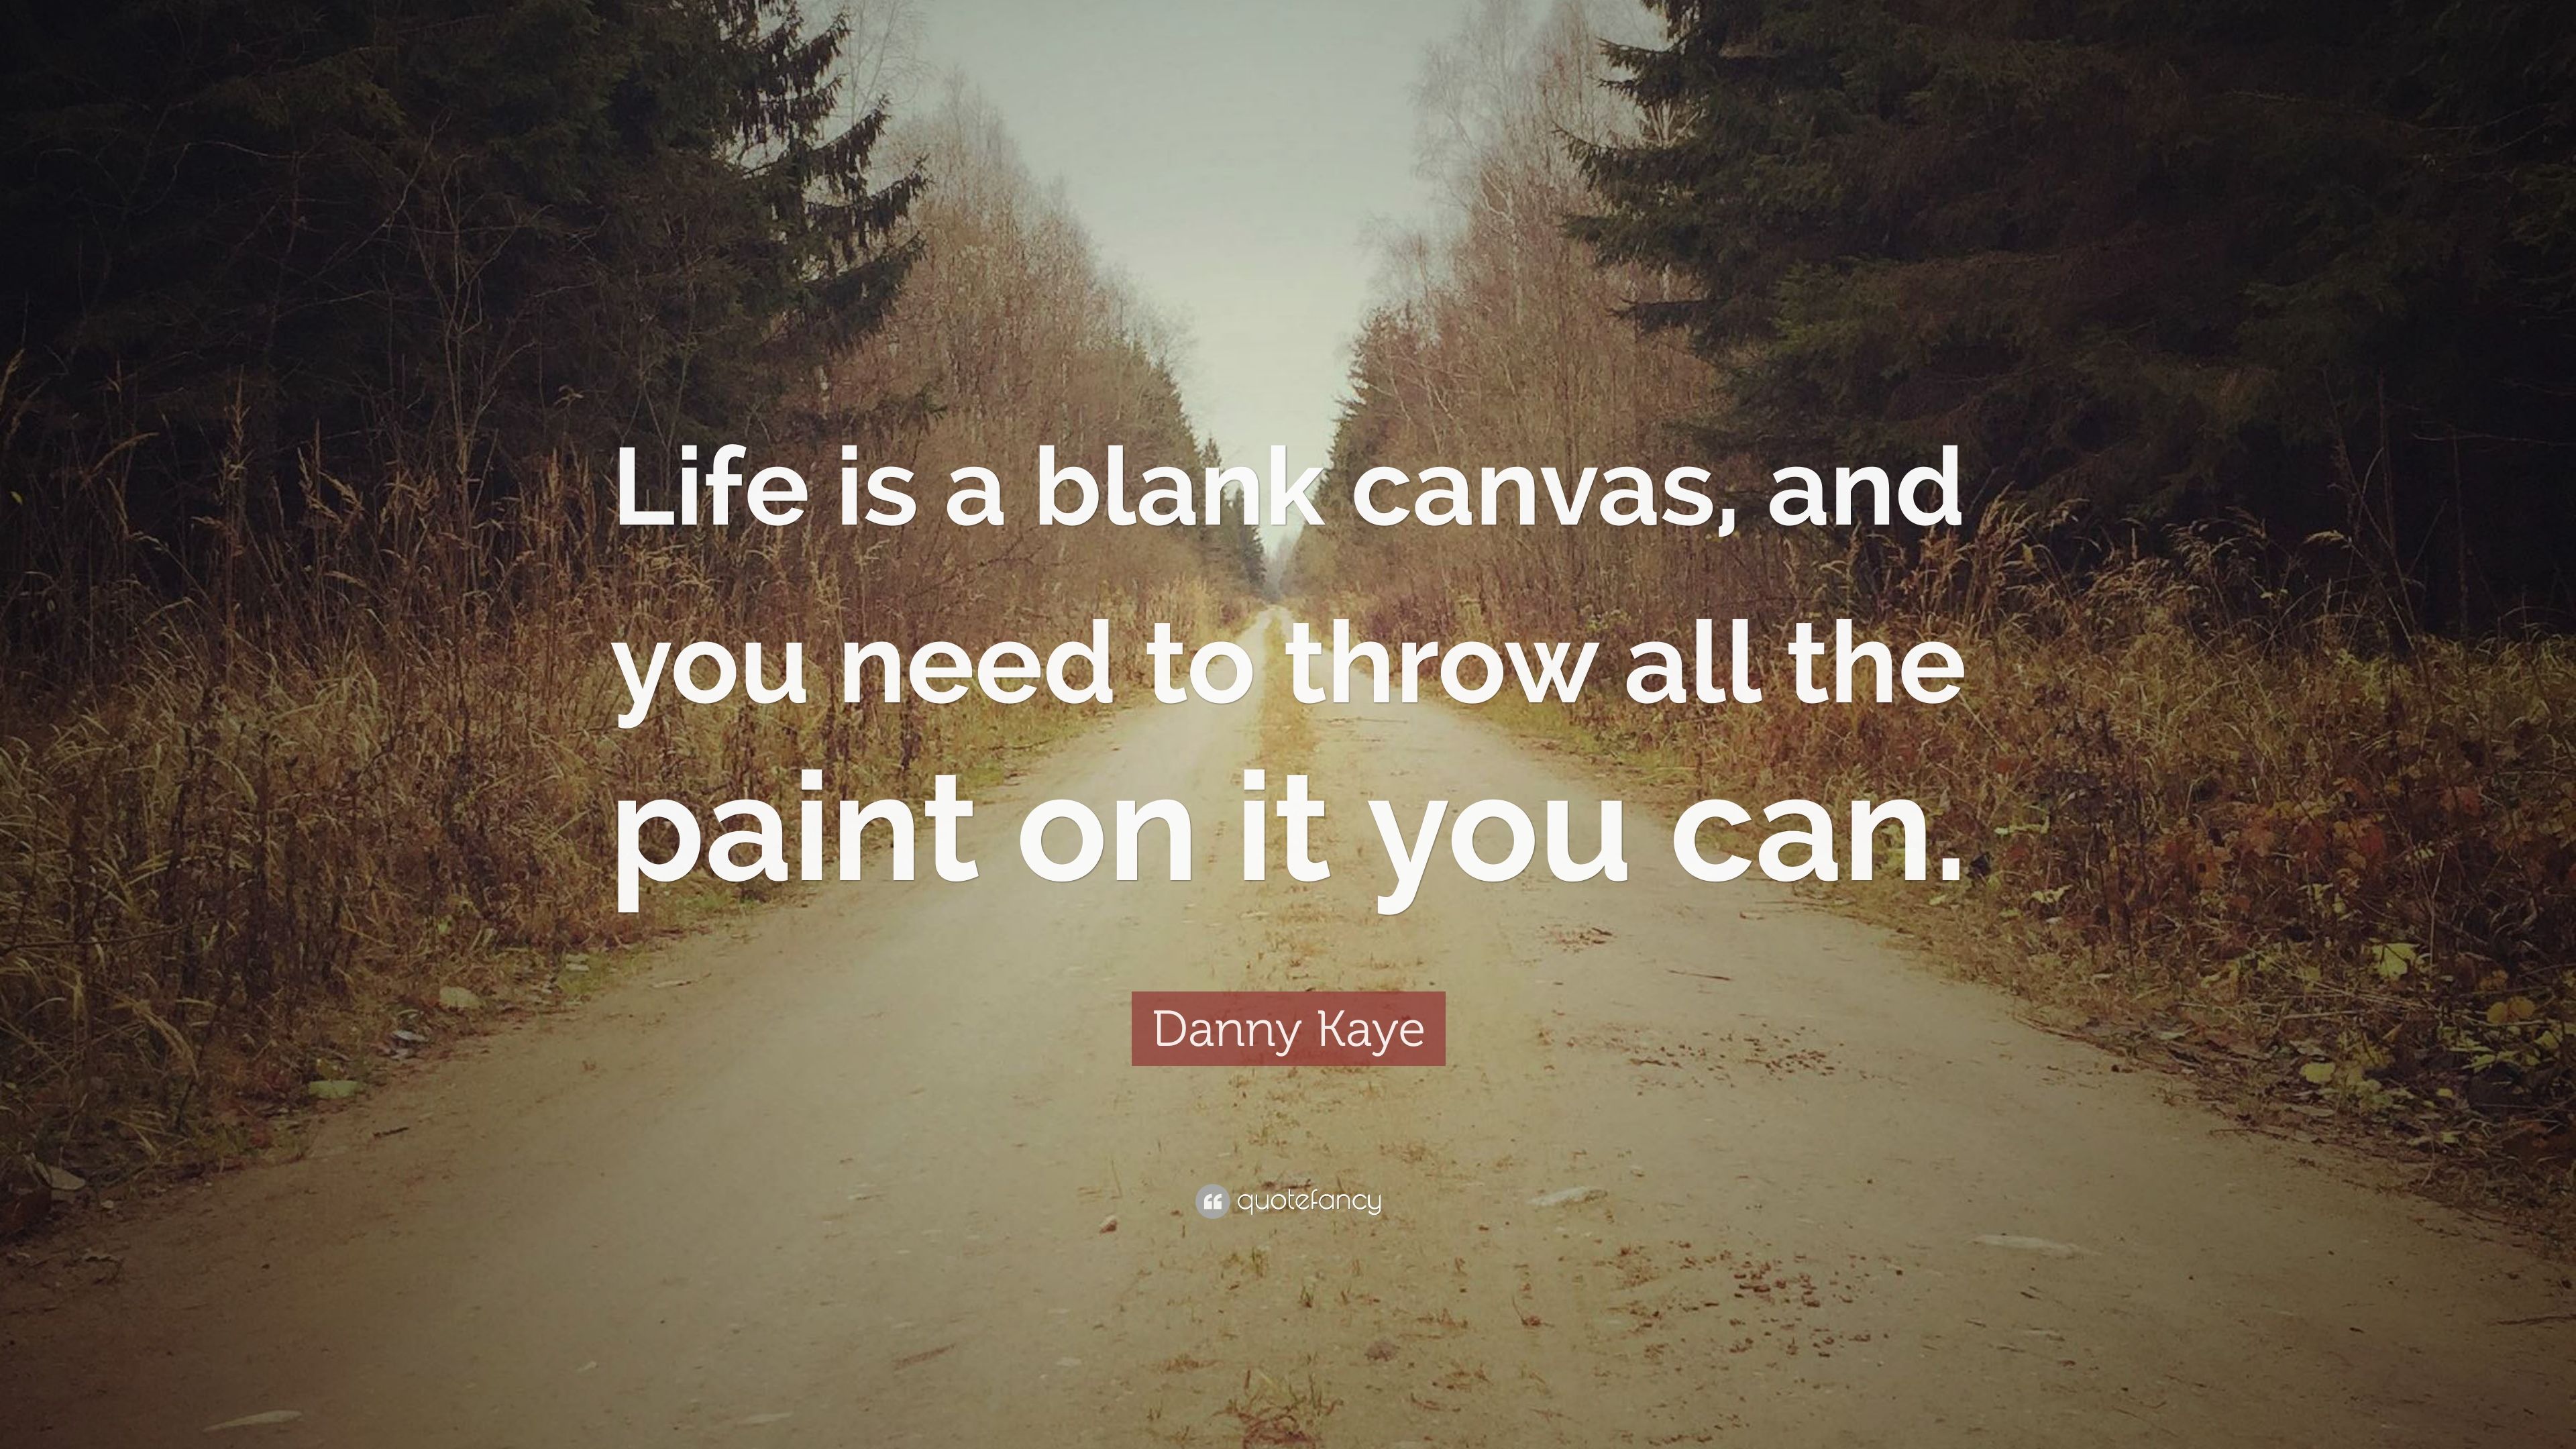 Danny Kaye Quote: “Life is a blank canvas, and you need to throw